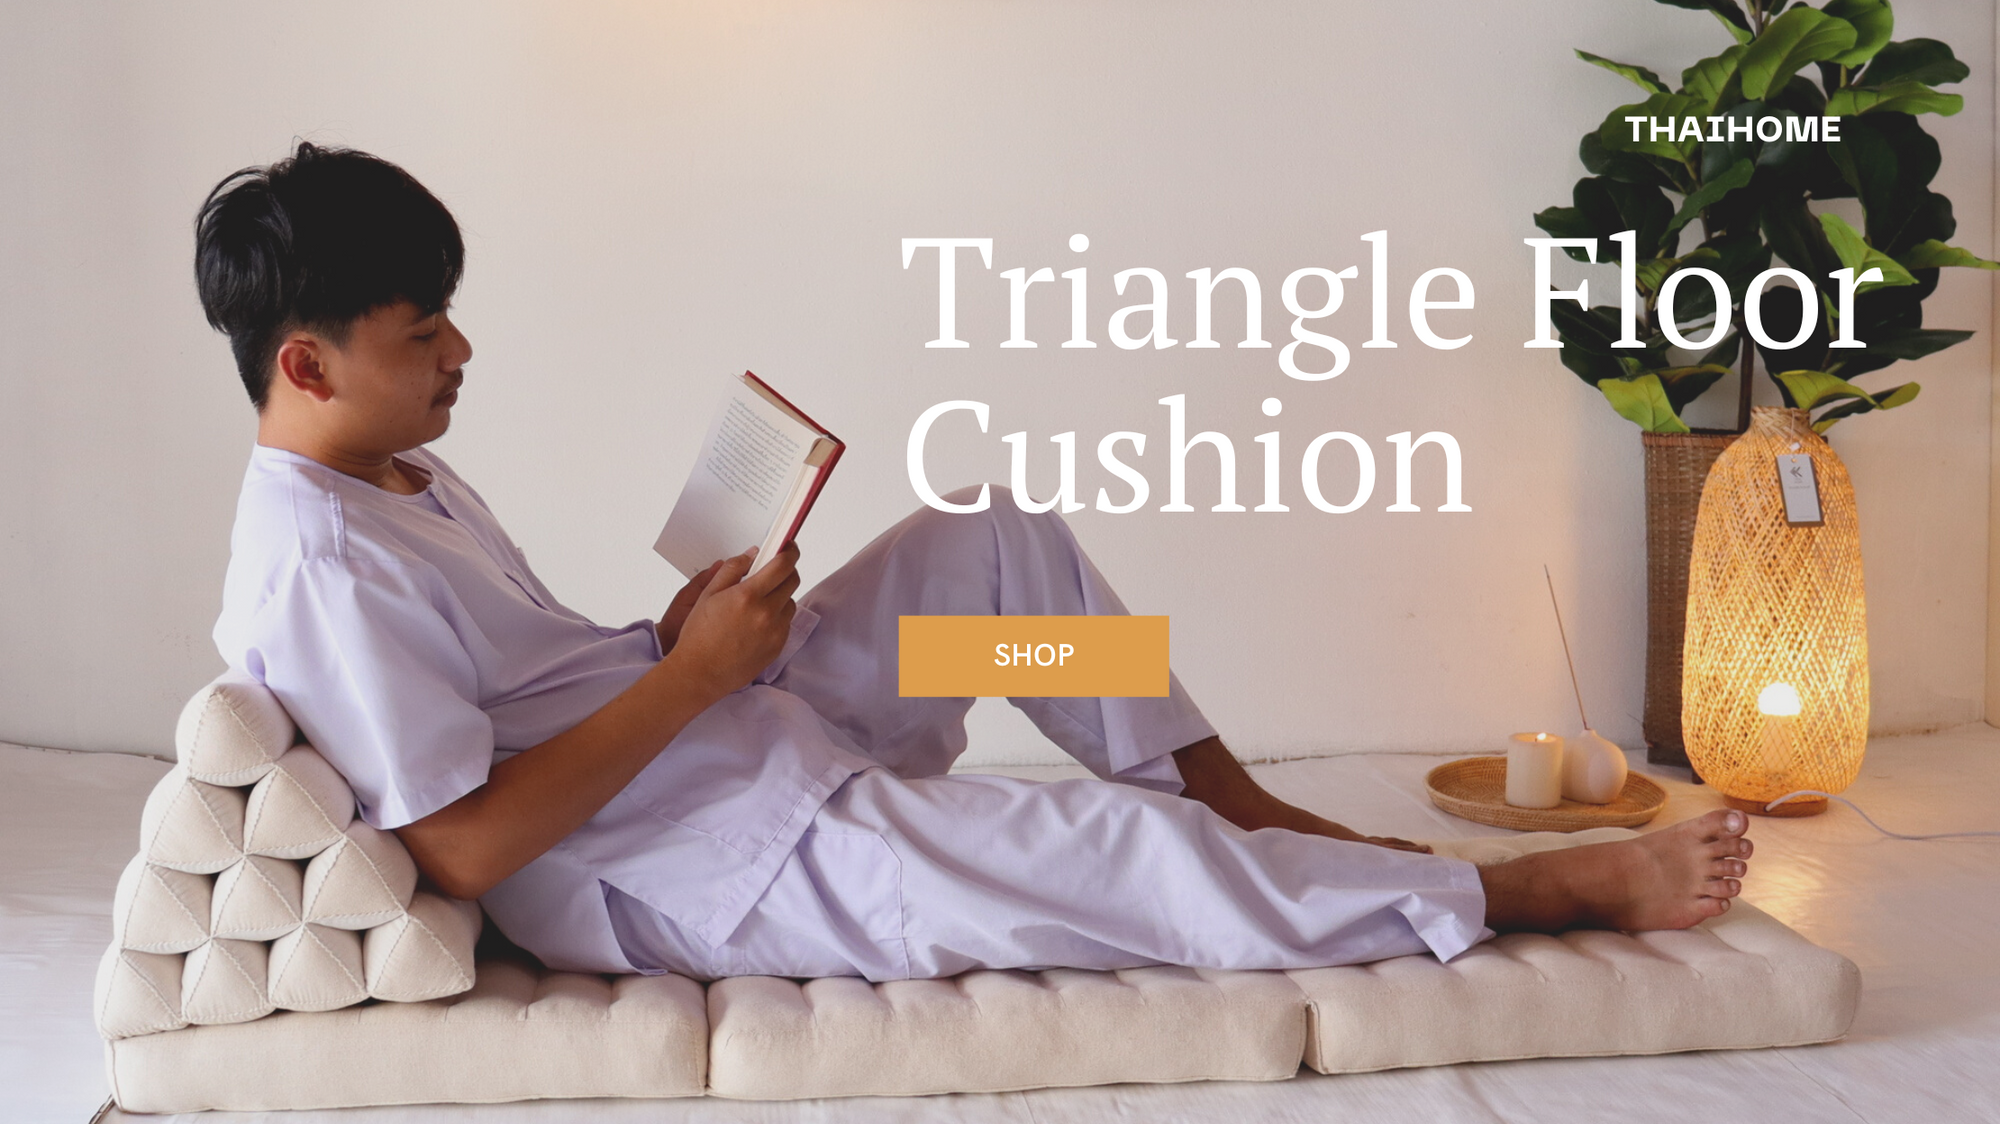 Triangle Floor Cushion by THAIHOME